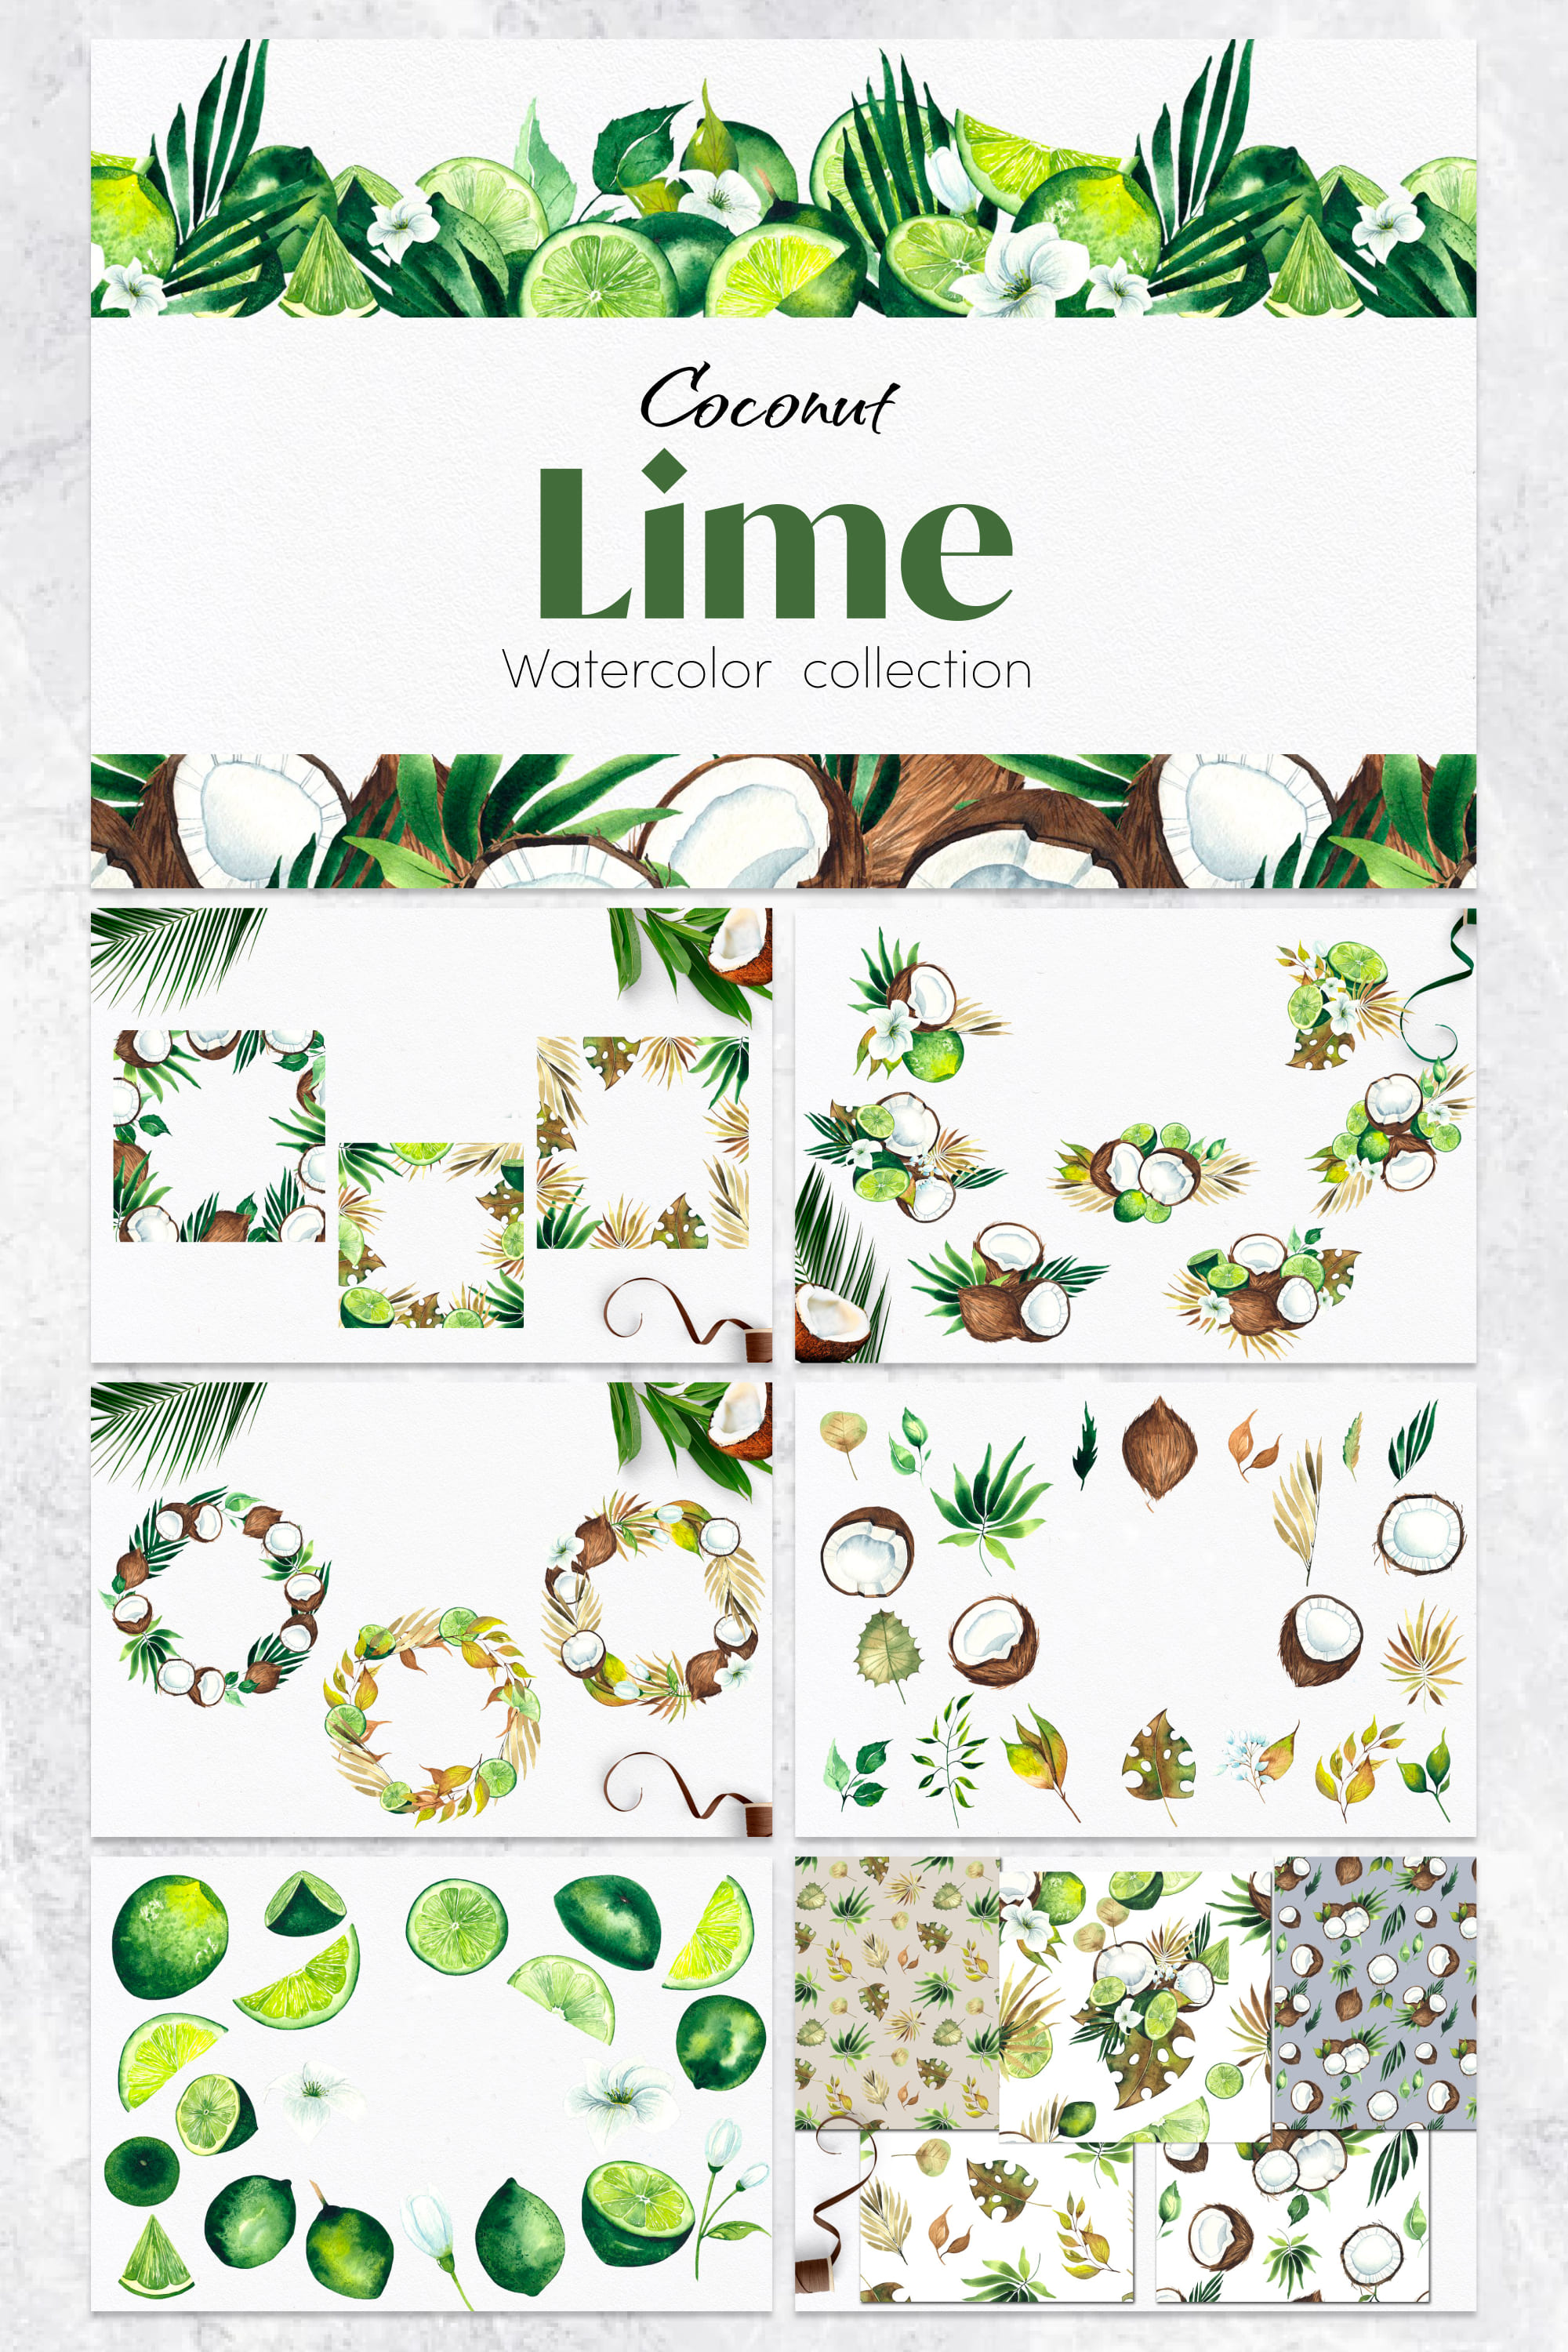 watercolor coconut lime collection pinterest